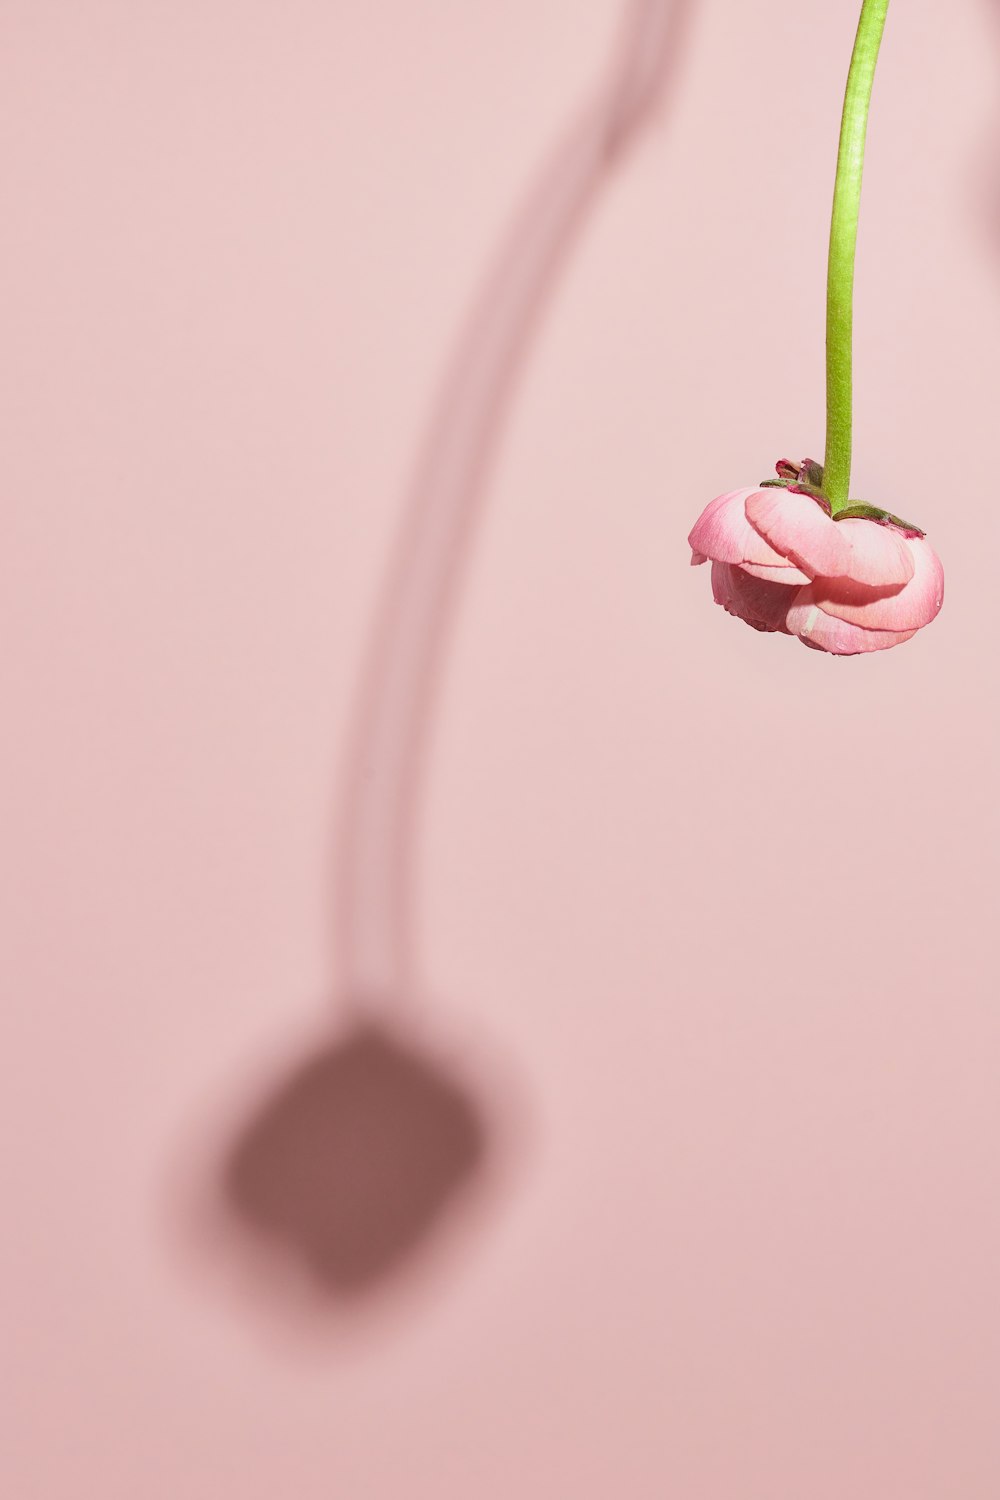 a pink flower with a green stem on a pink background